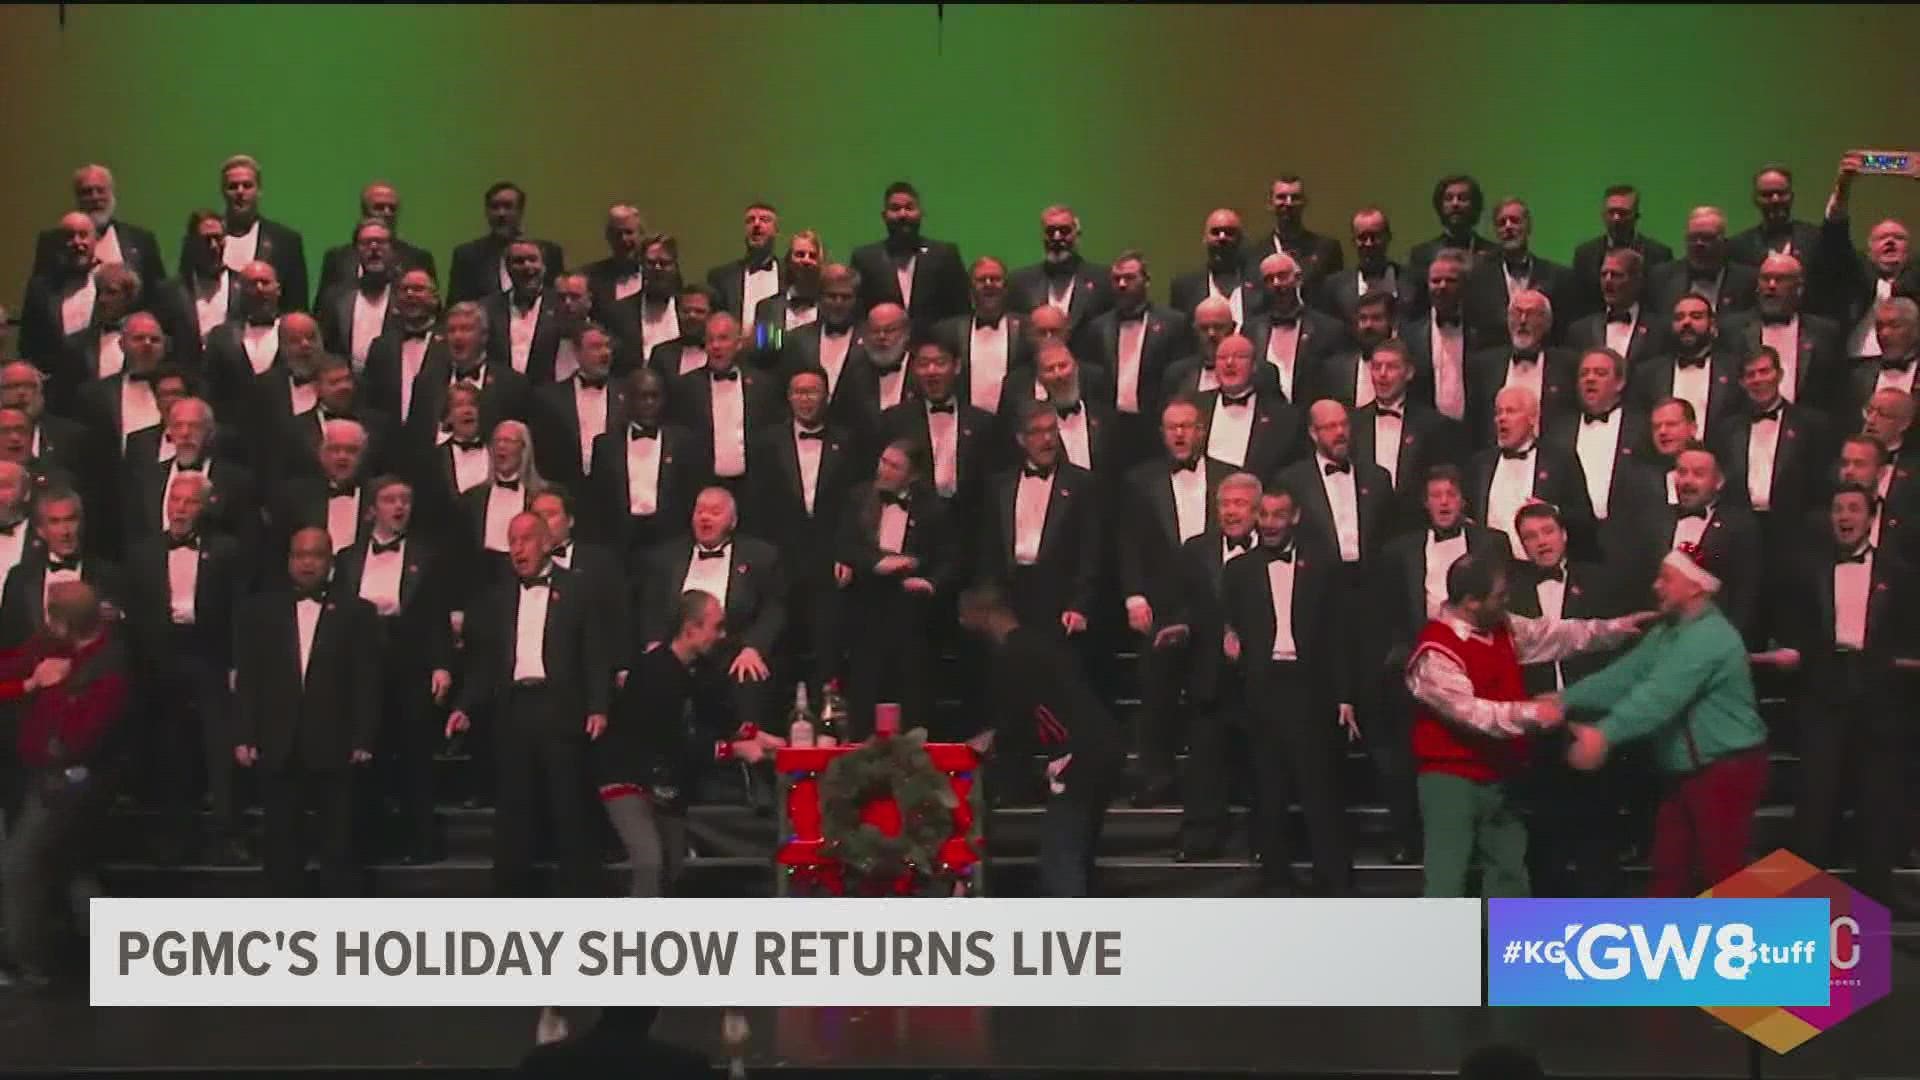 It's the first time they'll be back performing together in-person in nearly two years. Enjoy a mix of holiday favorites and winter tunes filled with holiday cheer.